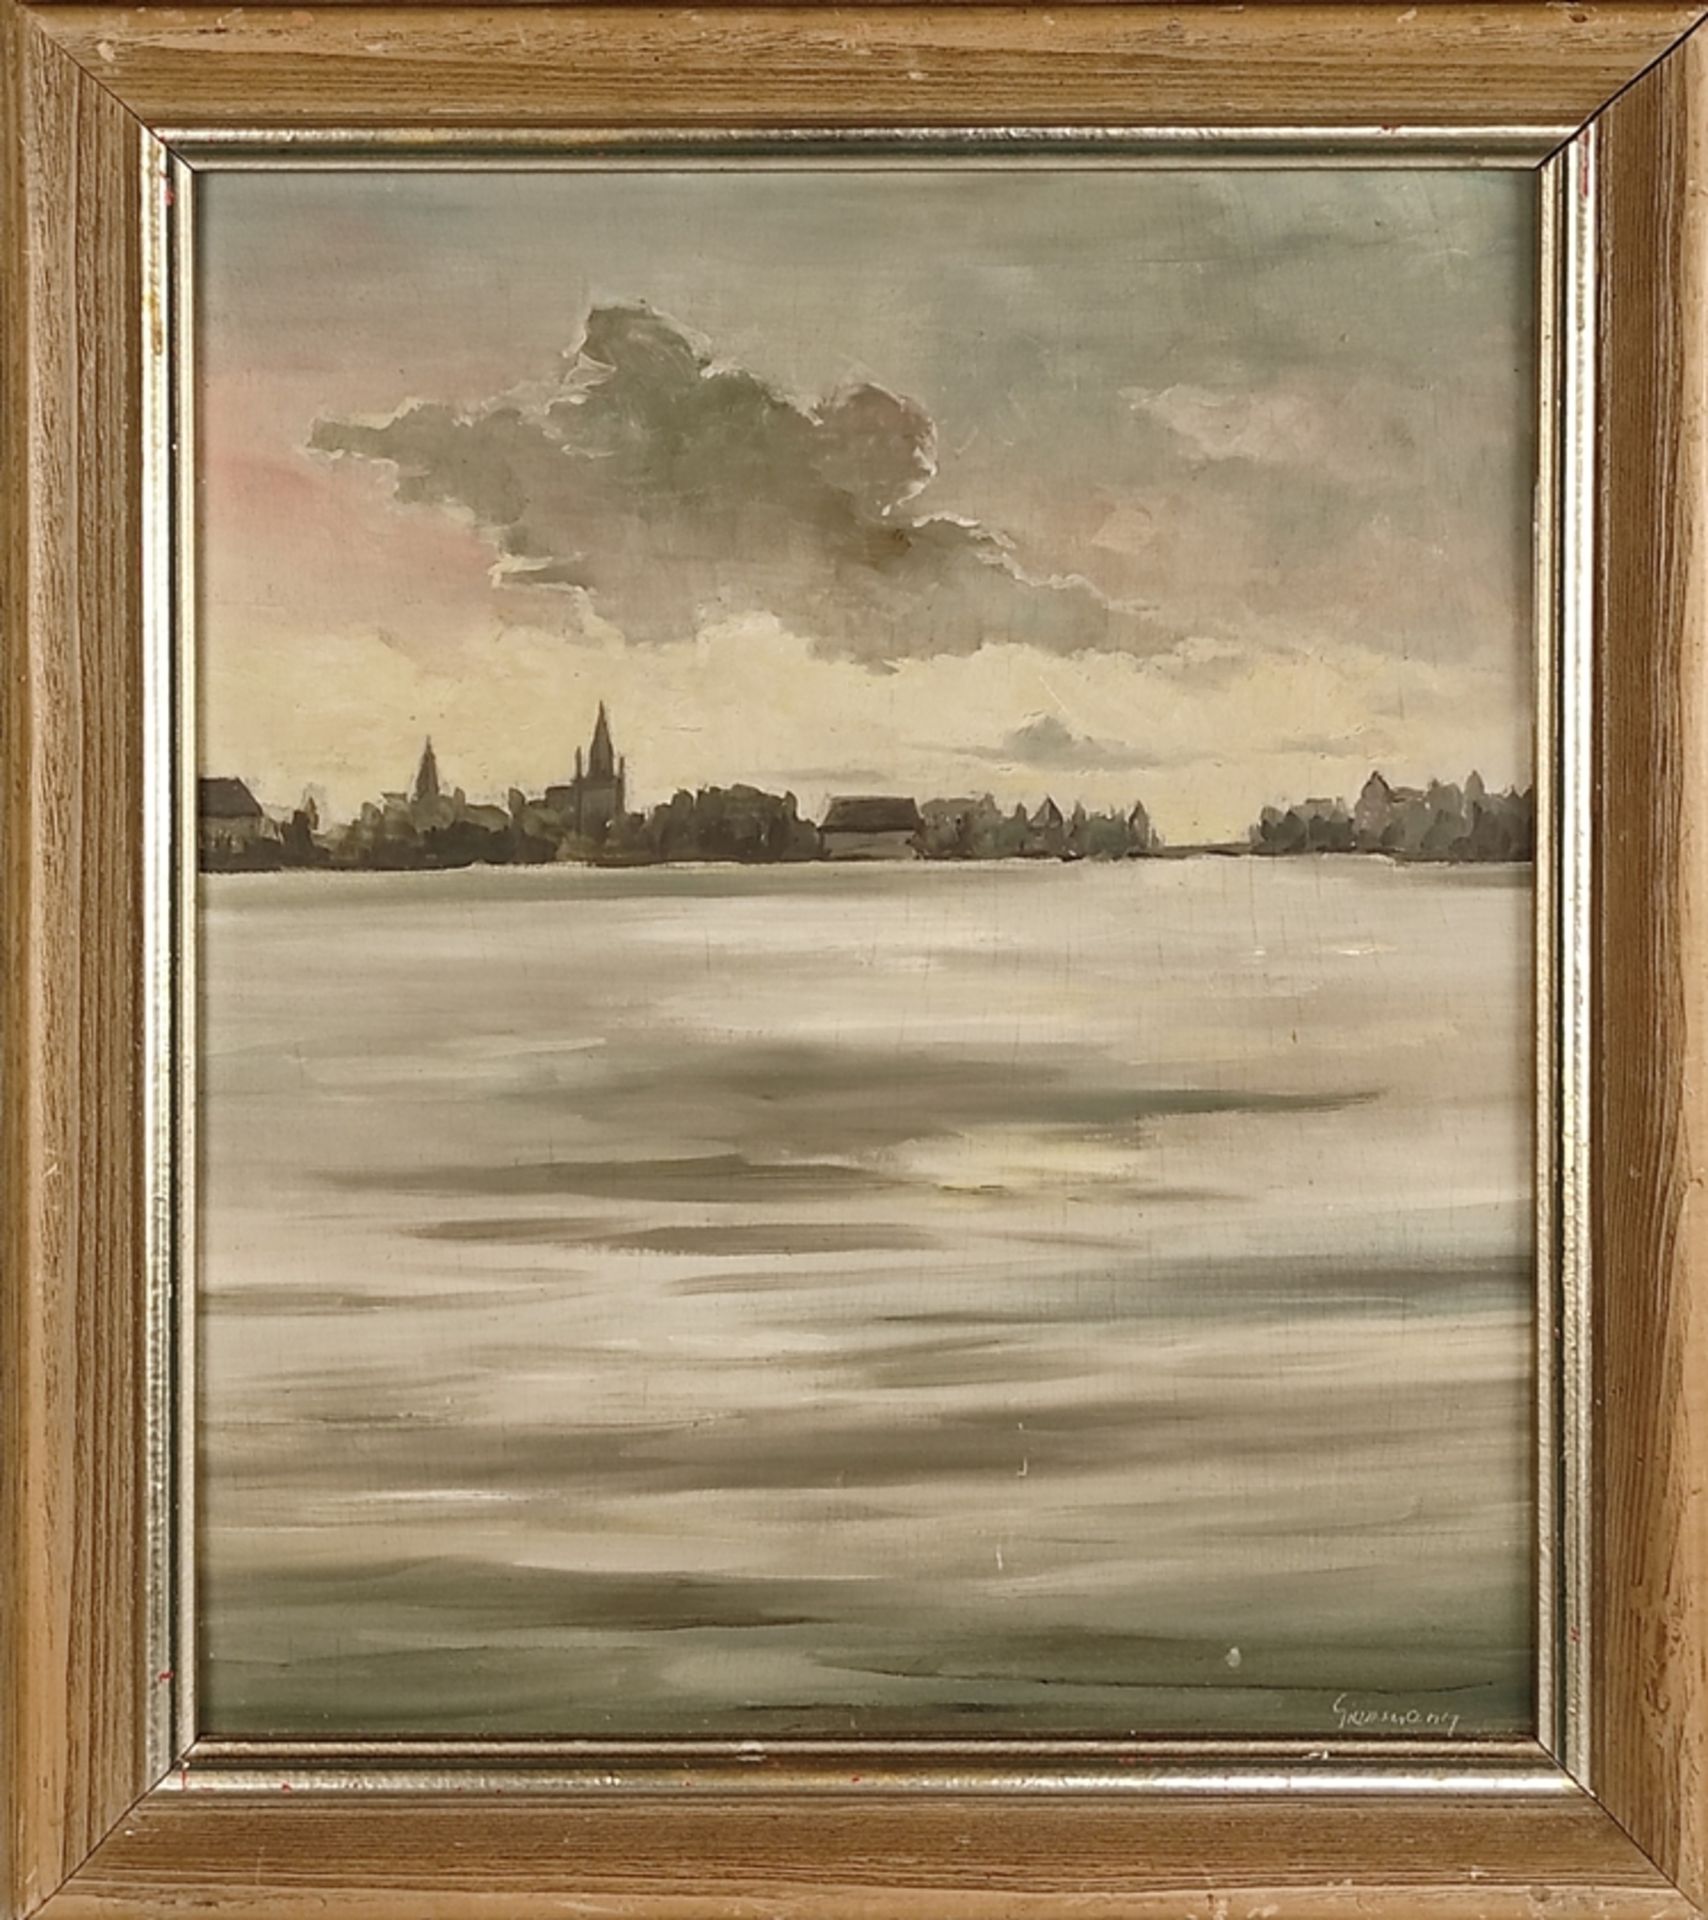 Constance artist (20th century) "View of Constance", with view of cathedral and bridge over the Rhi - Image 2 of 4